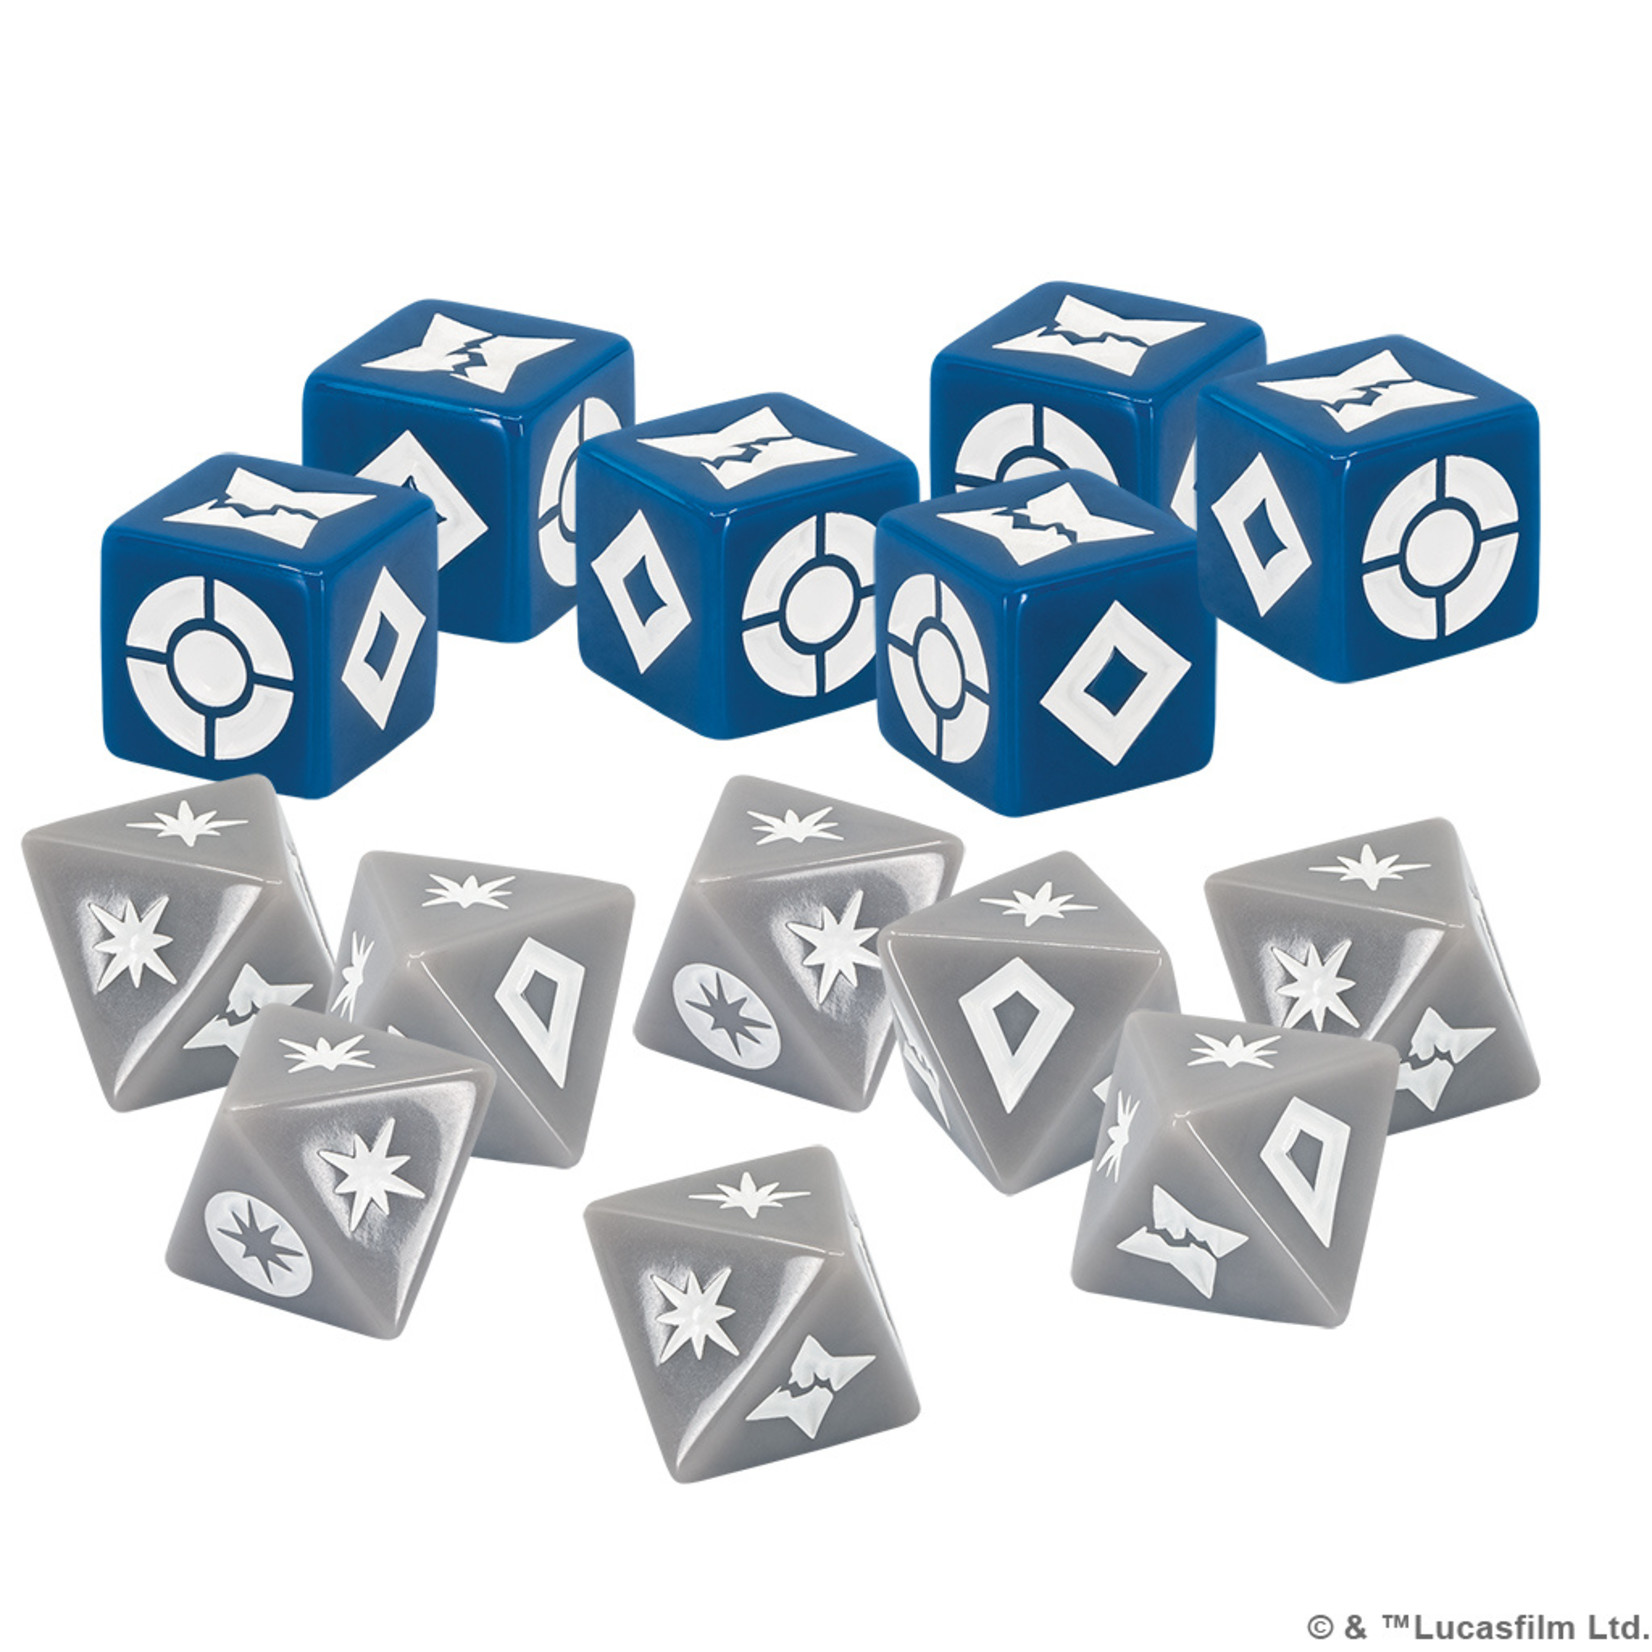 AMG Star Wars: Shatterpoint Dice Pack